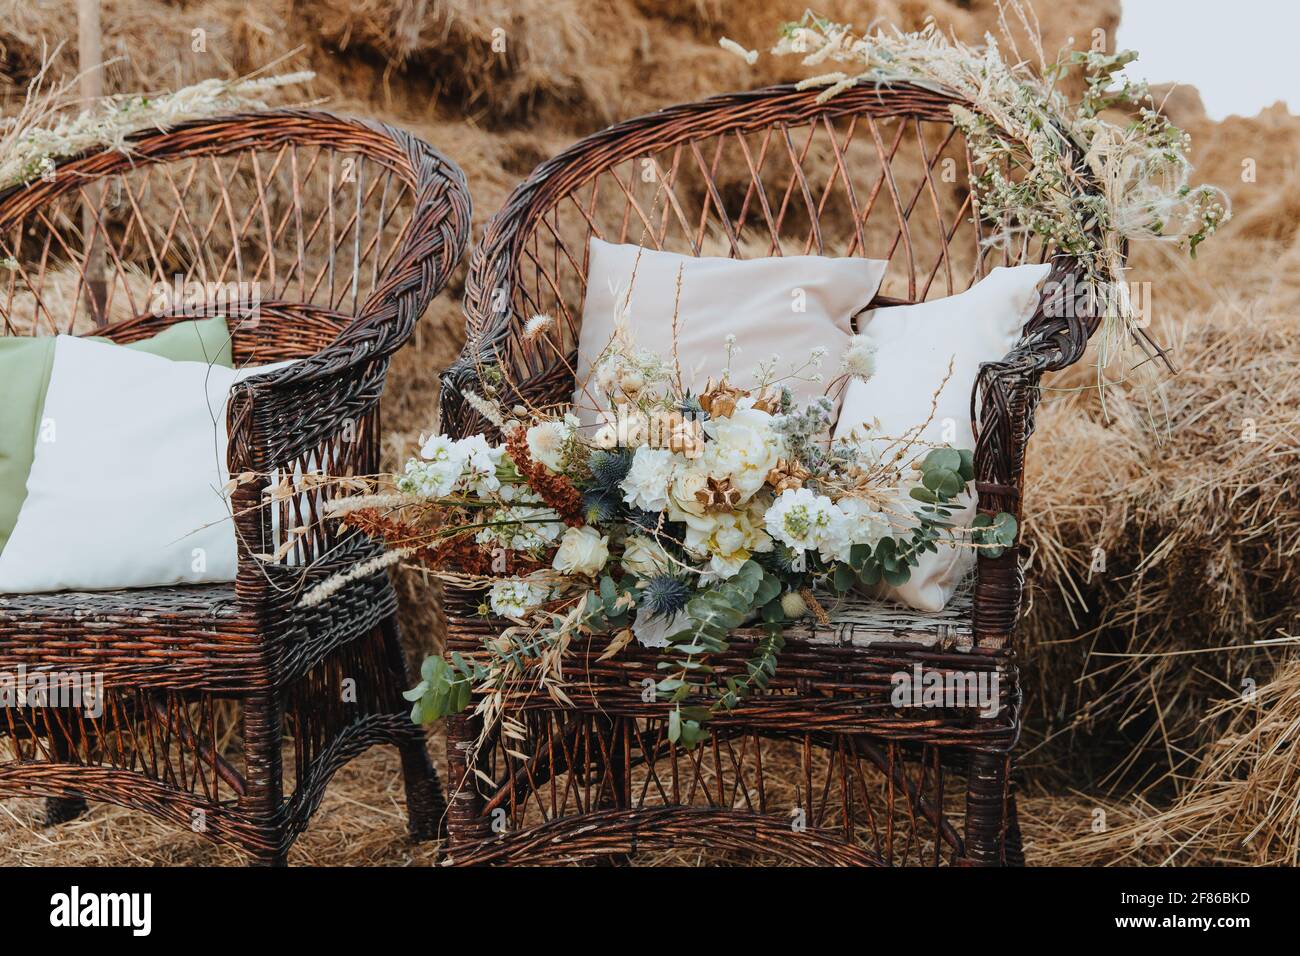 Two wicker chairs with white cushions and a bouquet of flowers on it. Rattan chairs with straw bales in the background. Boho style Stock Photo